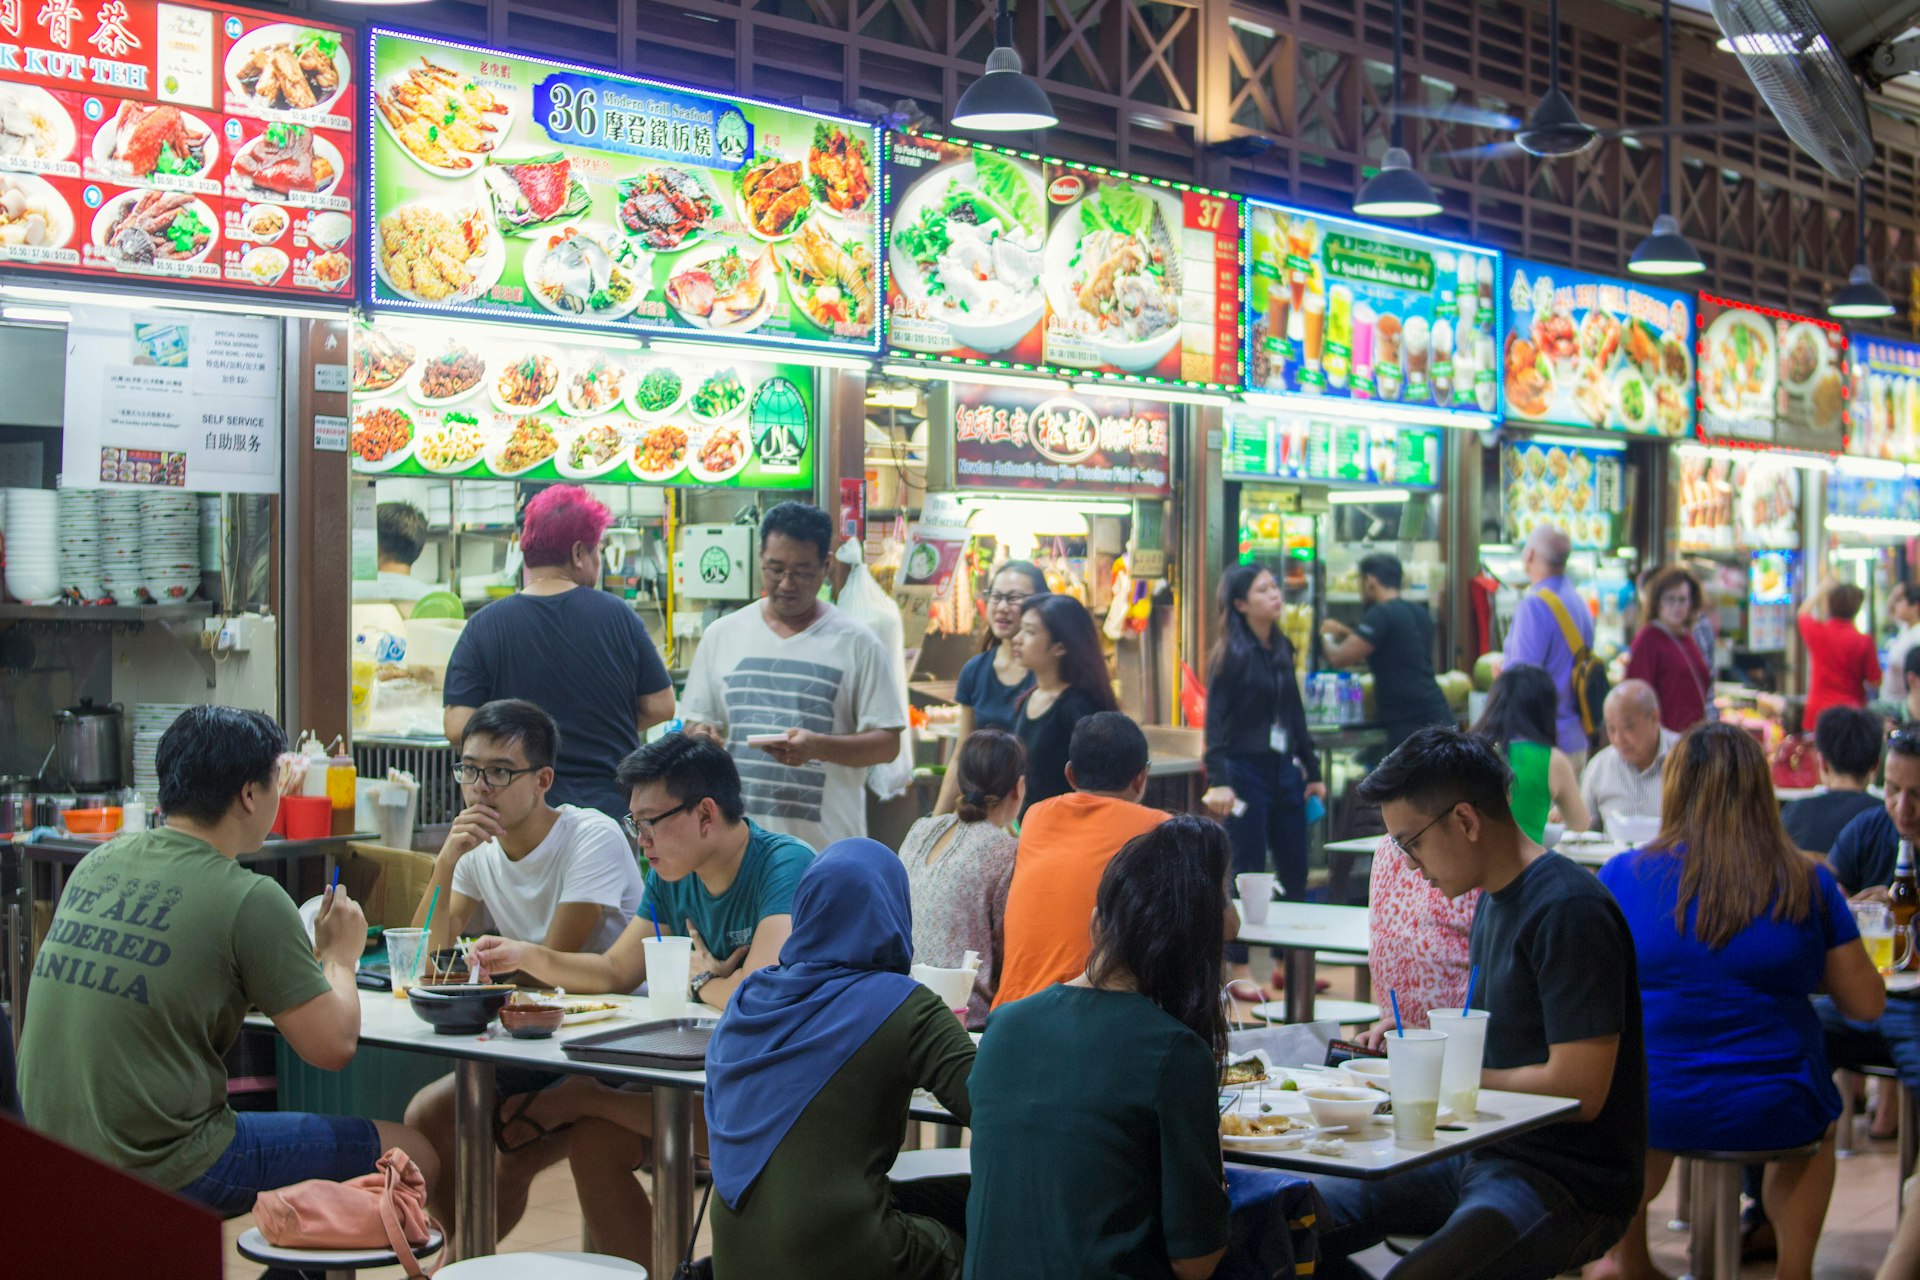 Diners at Newton food center in Singapore